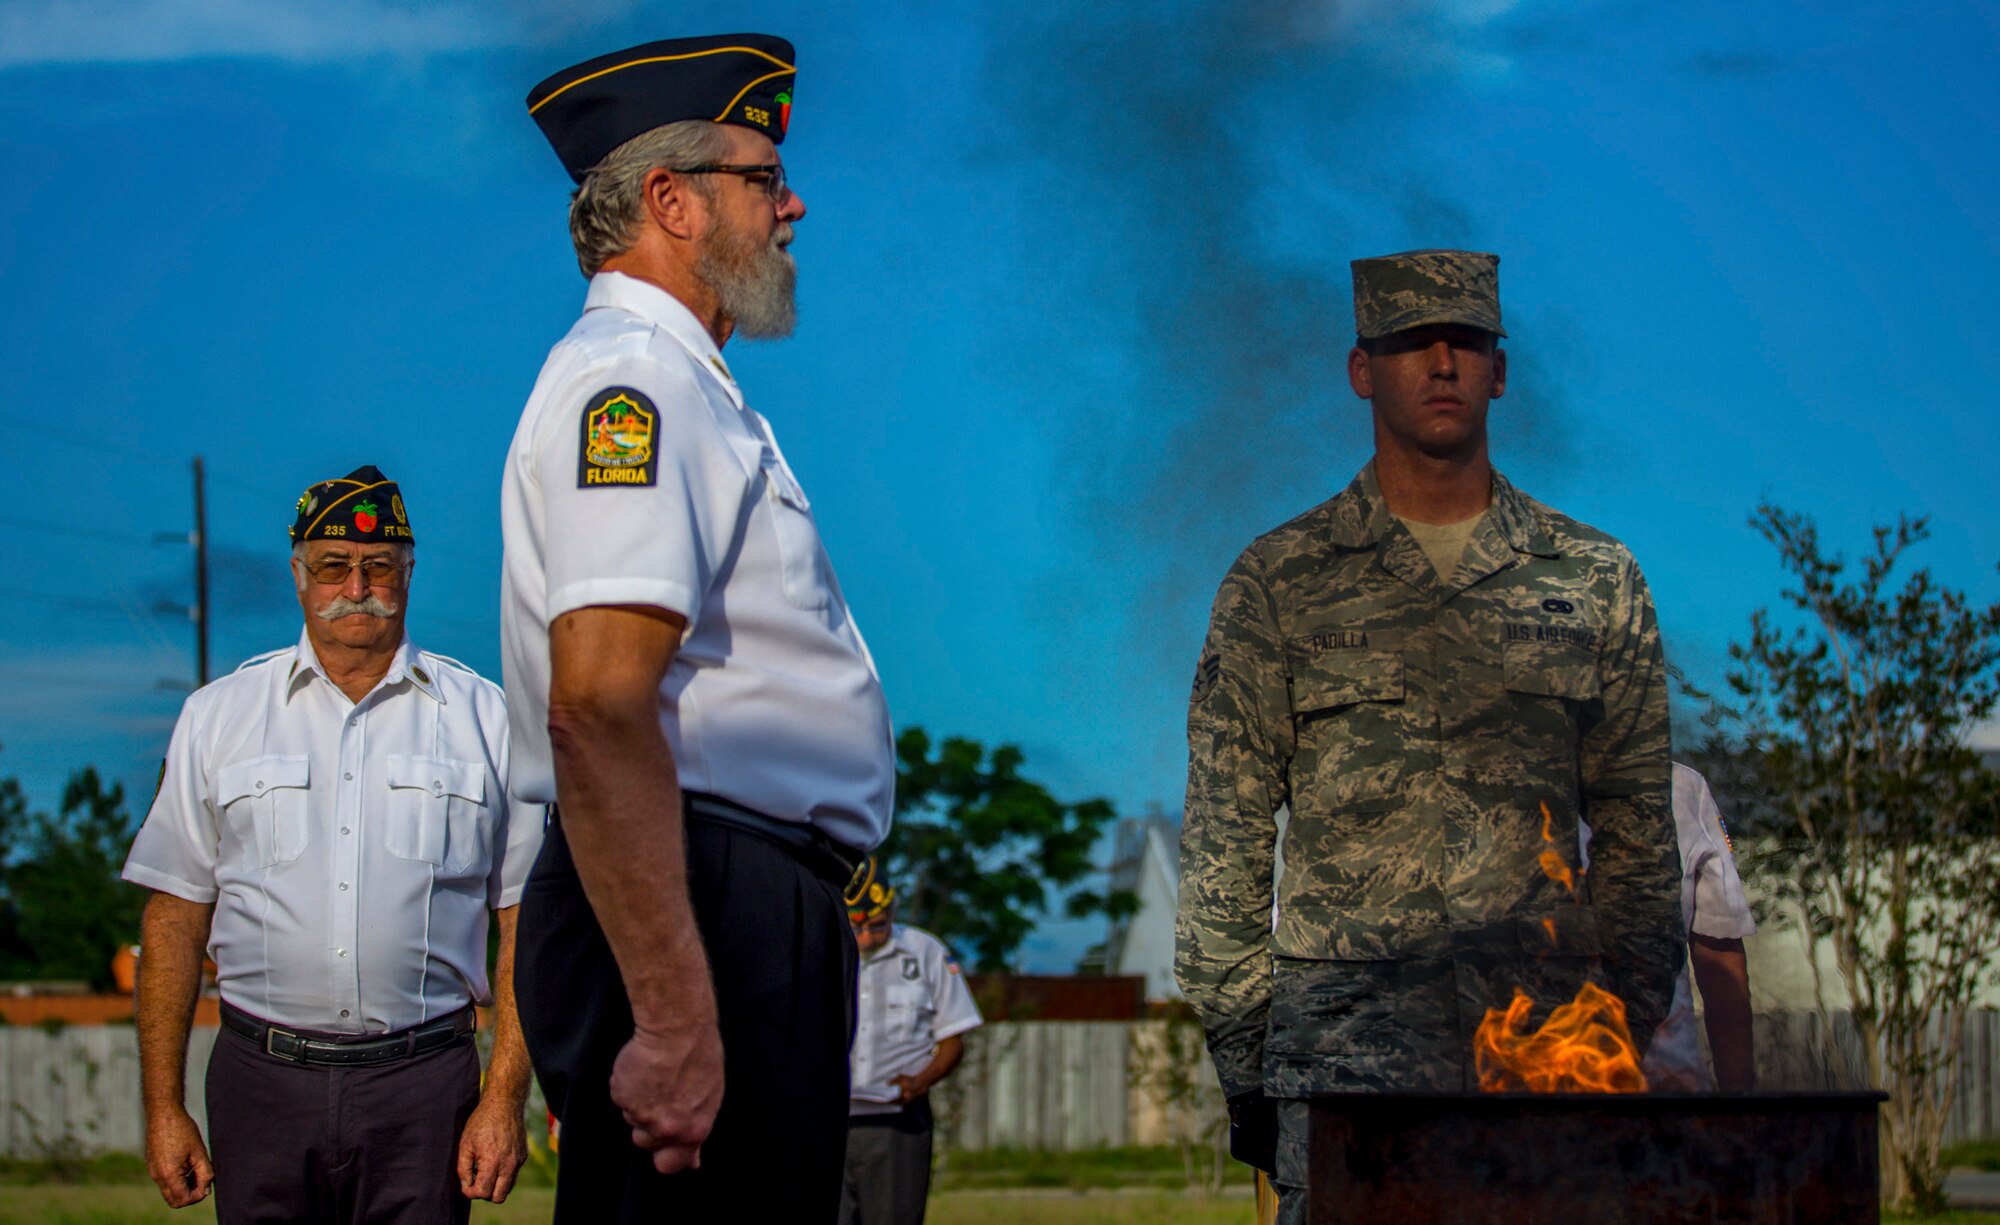 Senior Airman Antony Padilla, 96th Aircraft Maintenance Squadron, stands at attention with American Legion members as a unserviceable flag burns during a flag retirement ceremony at American Legion Post 235 in Fort Walton Beach on Flag Day, June 14. Honor Guards from Eglin Air Force Base and Hurlburt Field participated in the observance dedicated to the dignified retirement of worn and tattered flags no longer suitable to represent the nation. (U.S. Air Force photo/Kristin Stewart)